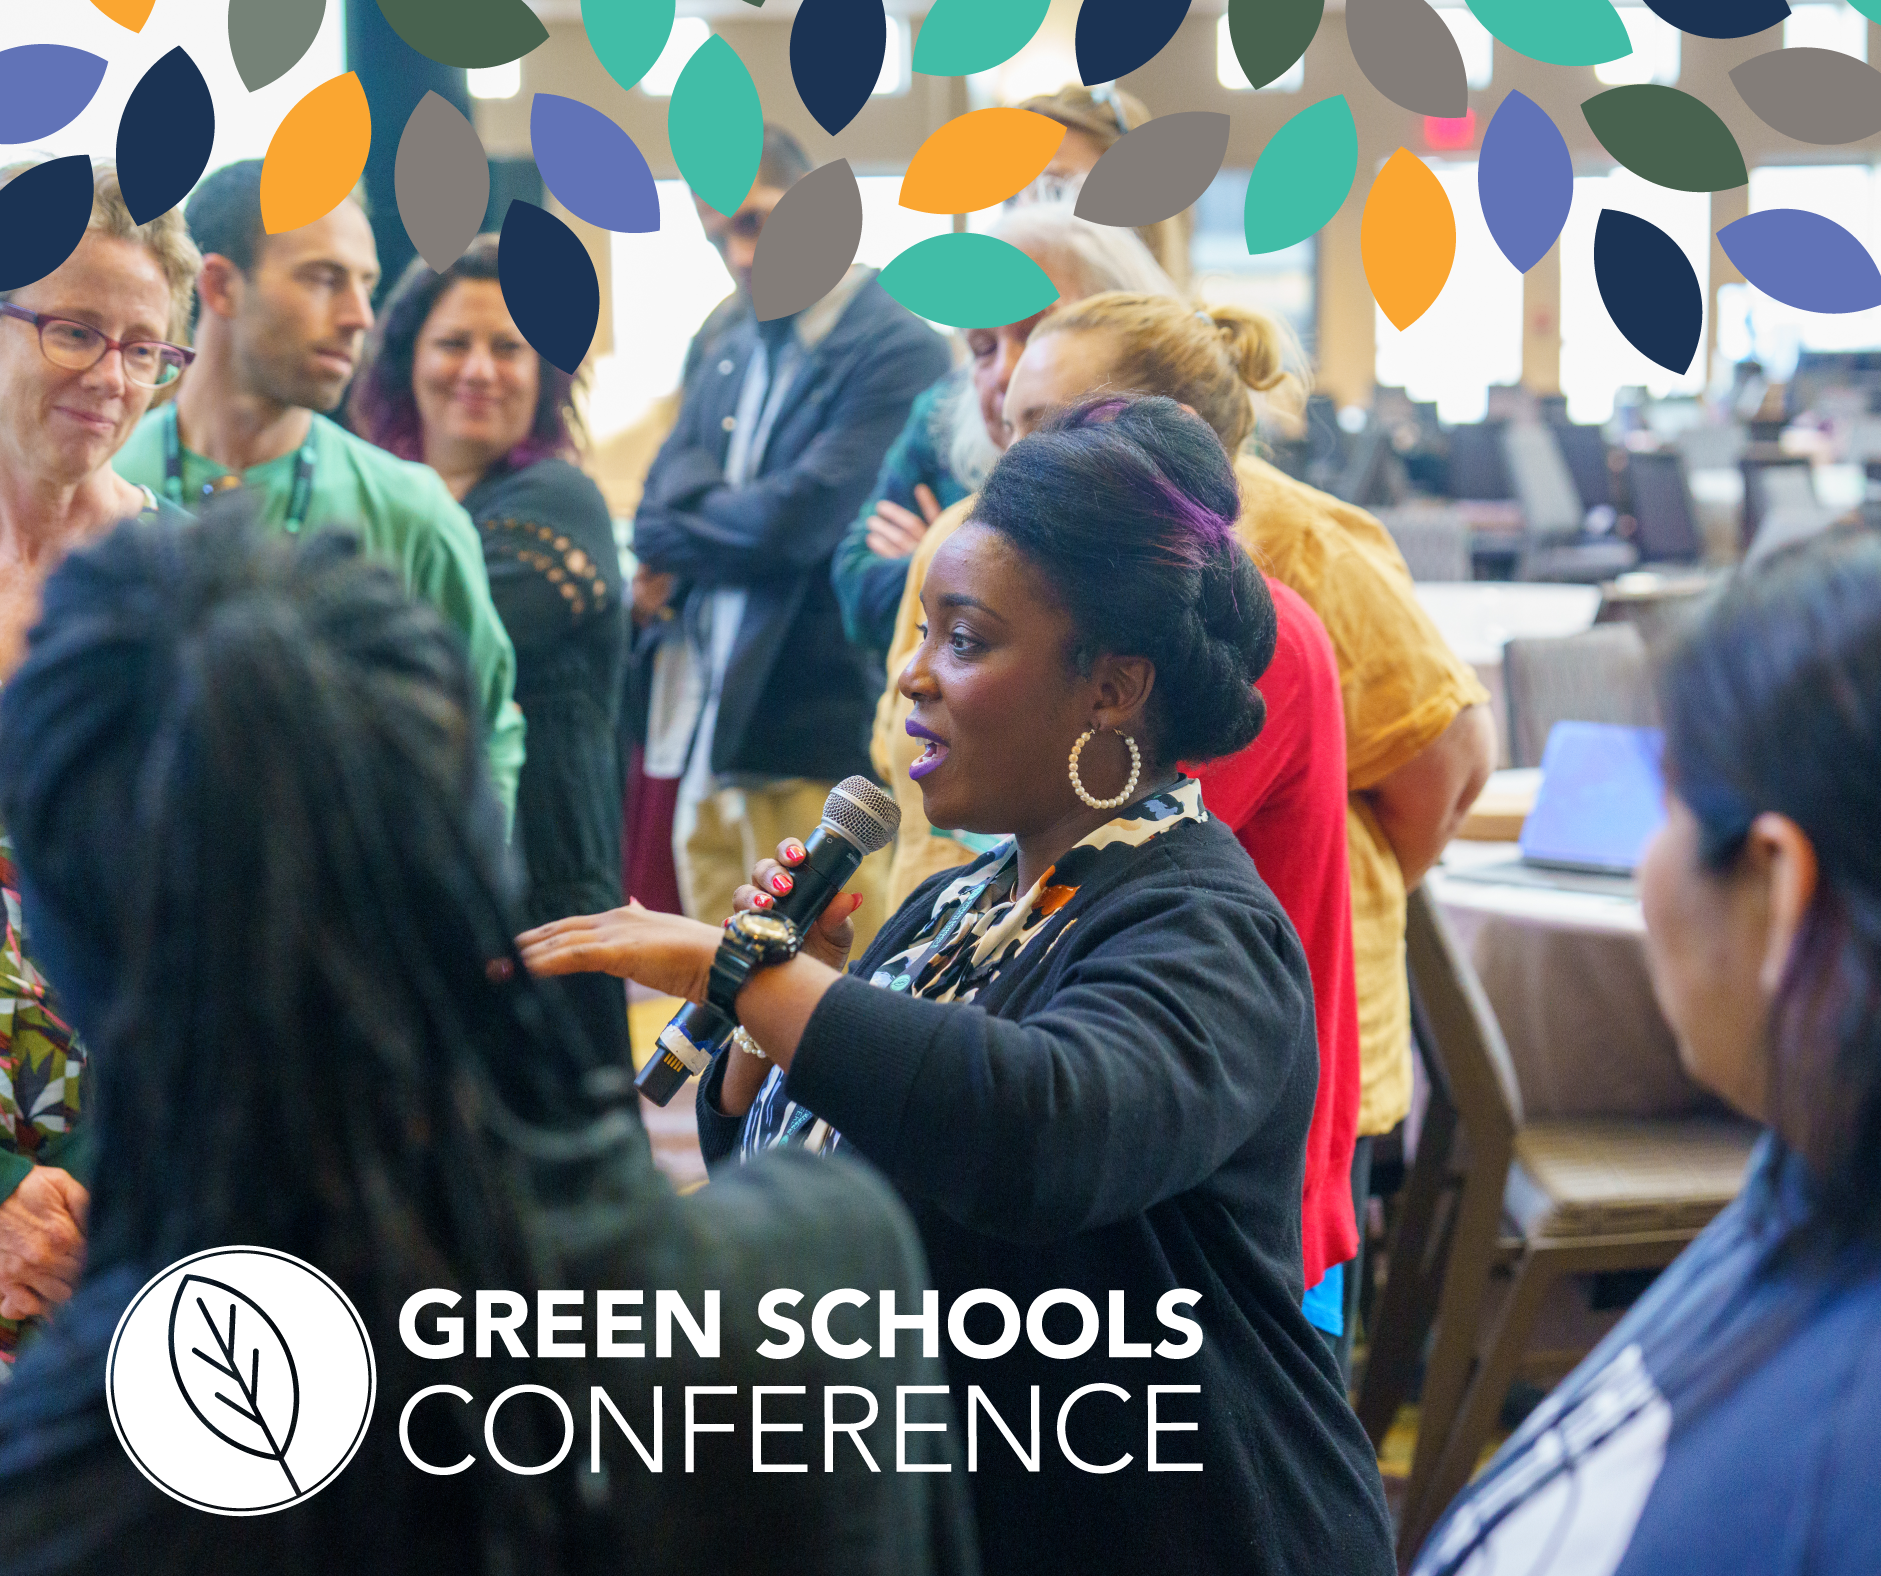 Green Schools Conference advertisement featuring woman speaking into microphone